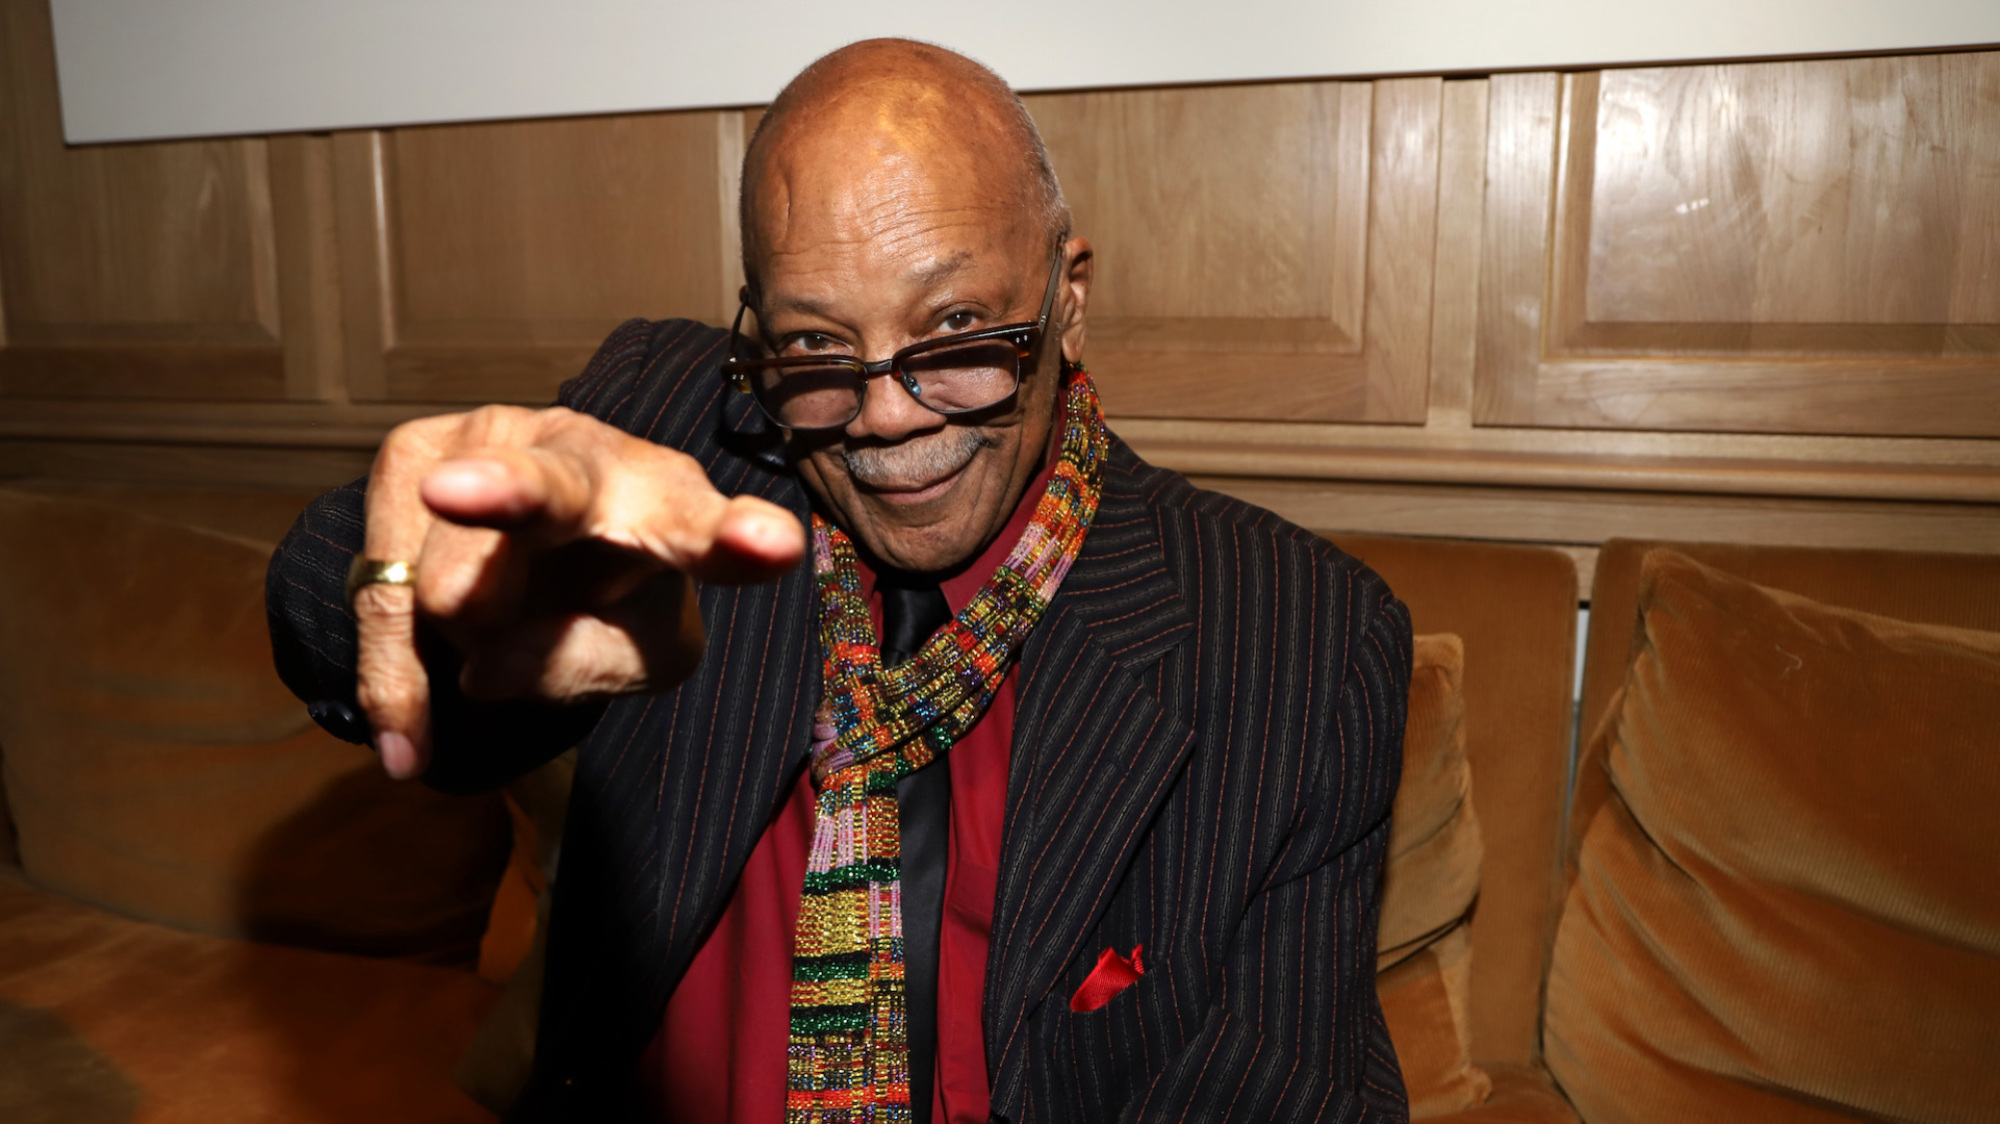 Quincy Jones sits on a leather couch pointing at the camera.